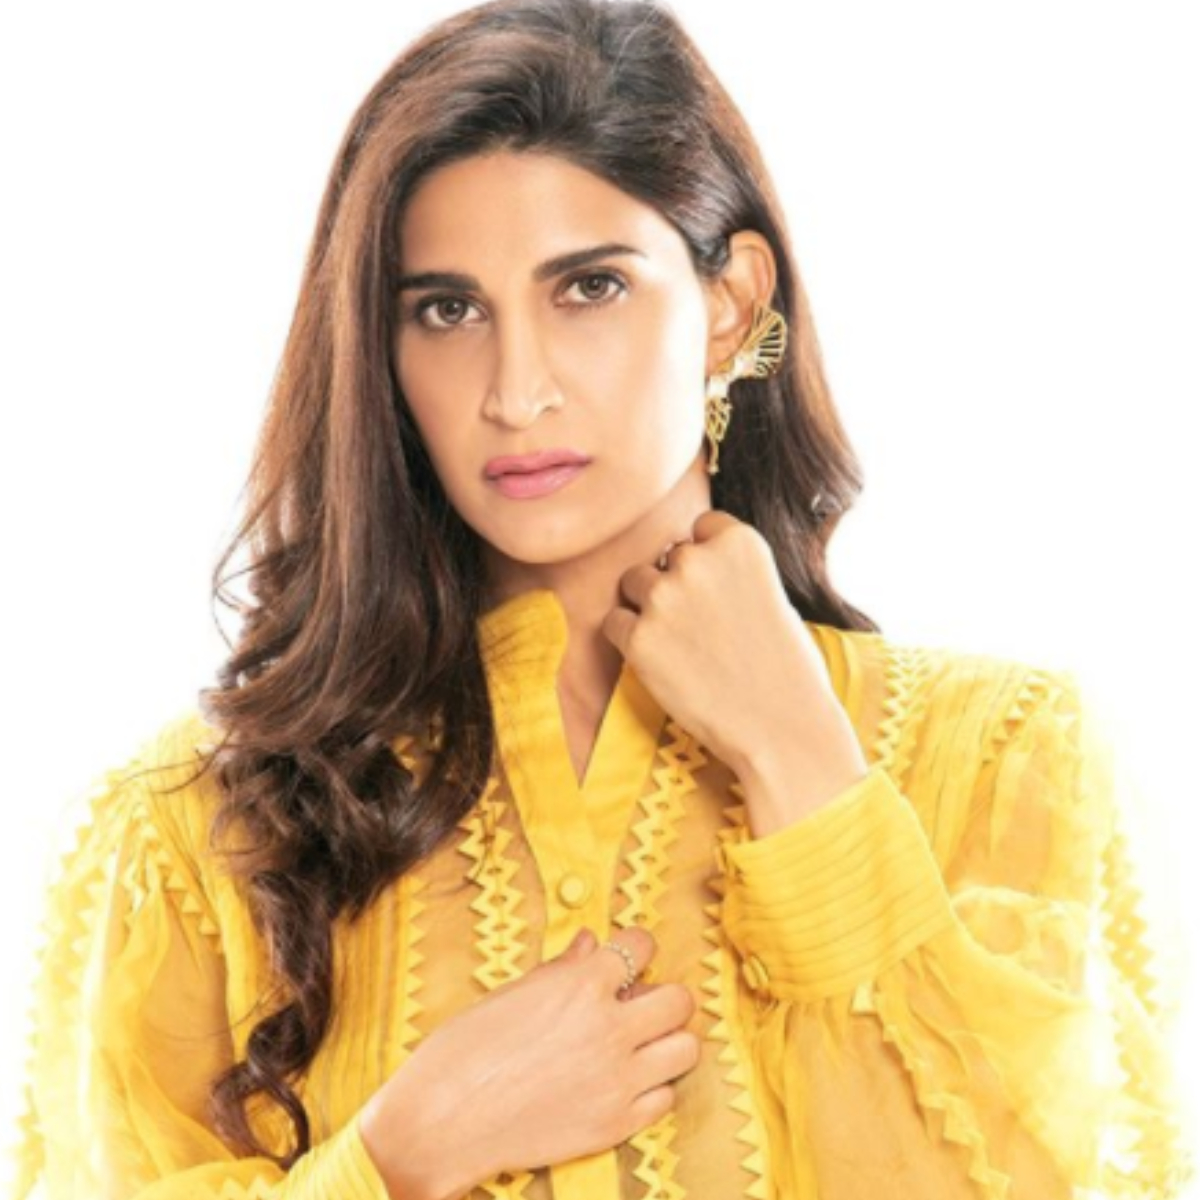 EXCLUSIVE: Aahana Kumra on Marzi, Me Too movement in India: I think it got diluted very fast